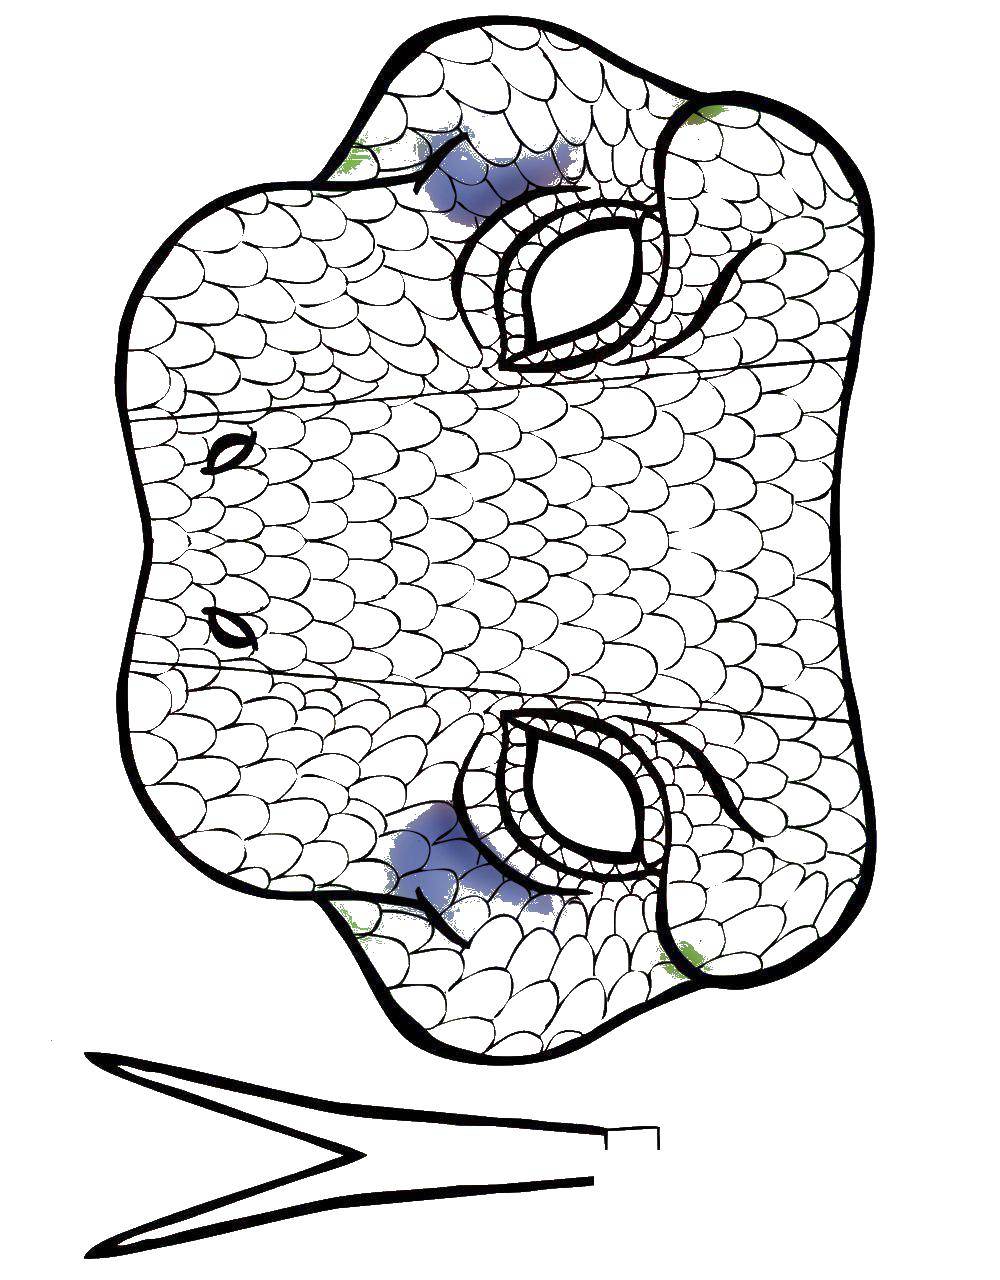 Coloring Mask snake. Category Masks . Tags:  the snake, the mask.